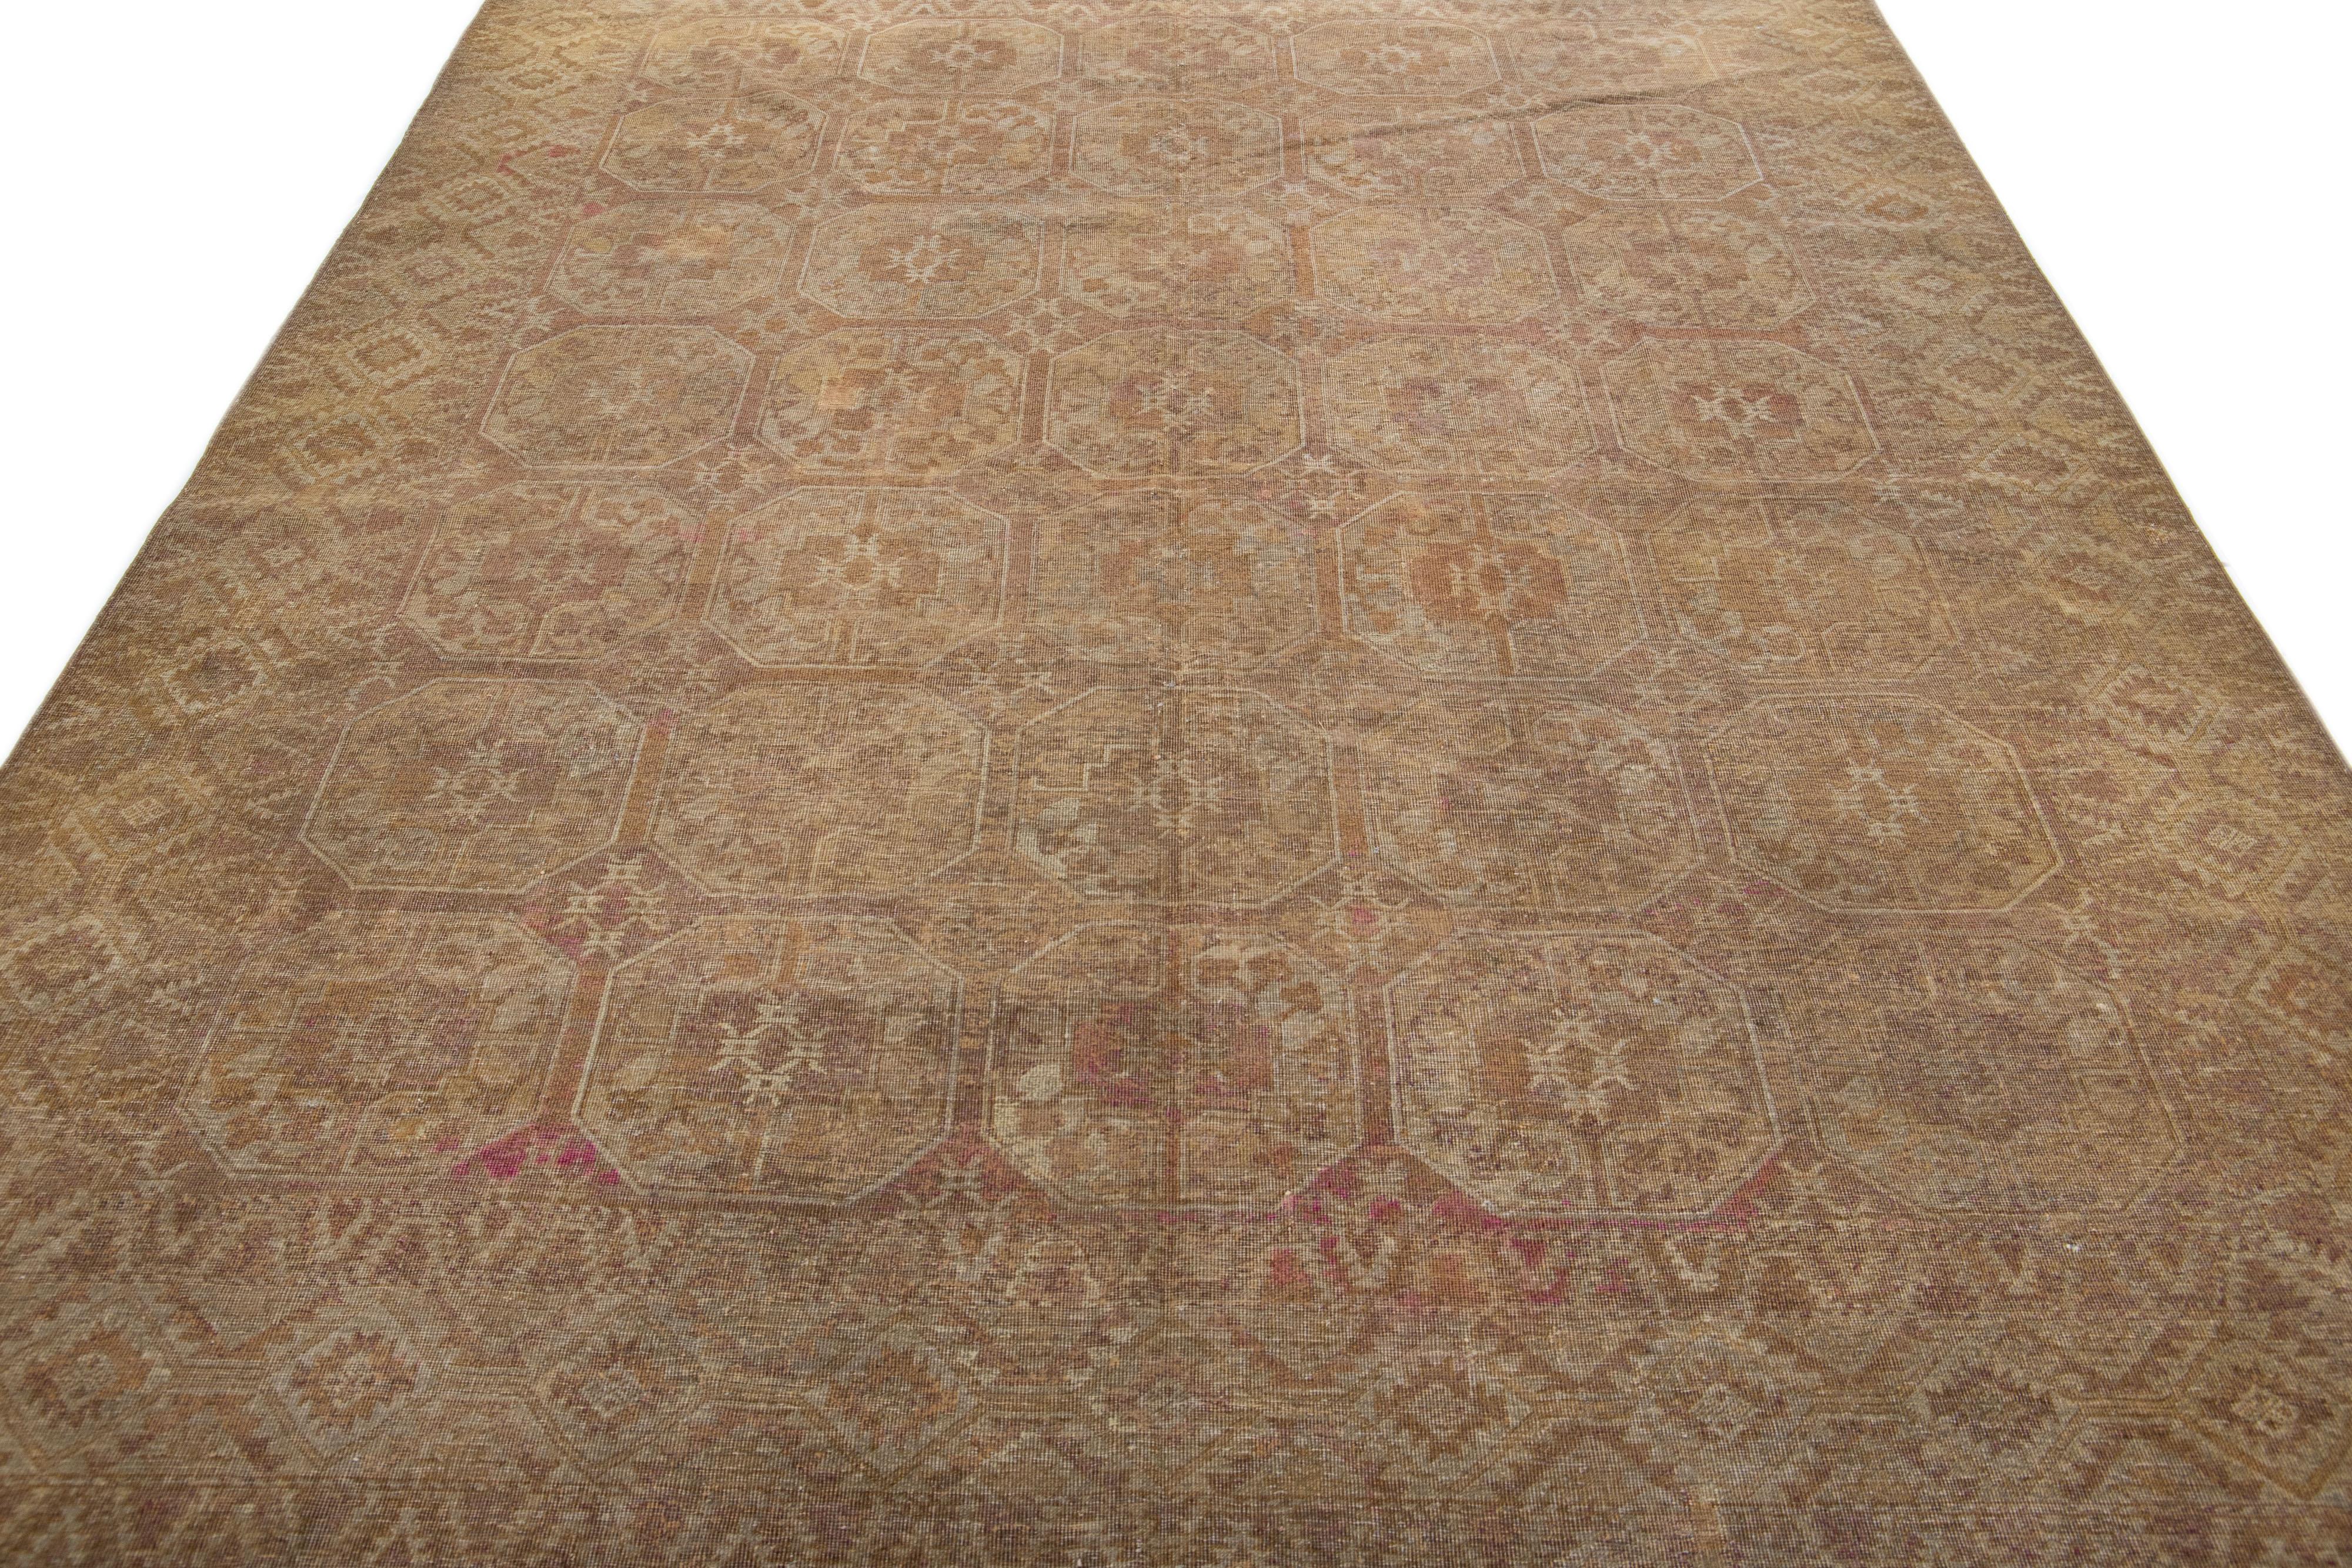 Beautiful antique Turkmen hand-knotted wool rug with a brown color field in a gorgeous all-over Gul pattern design.

This rug measures: 7'9